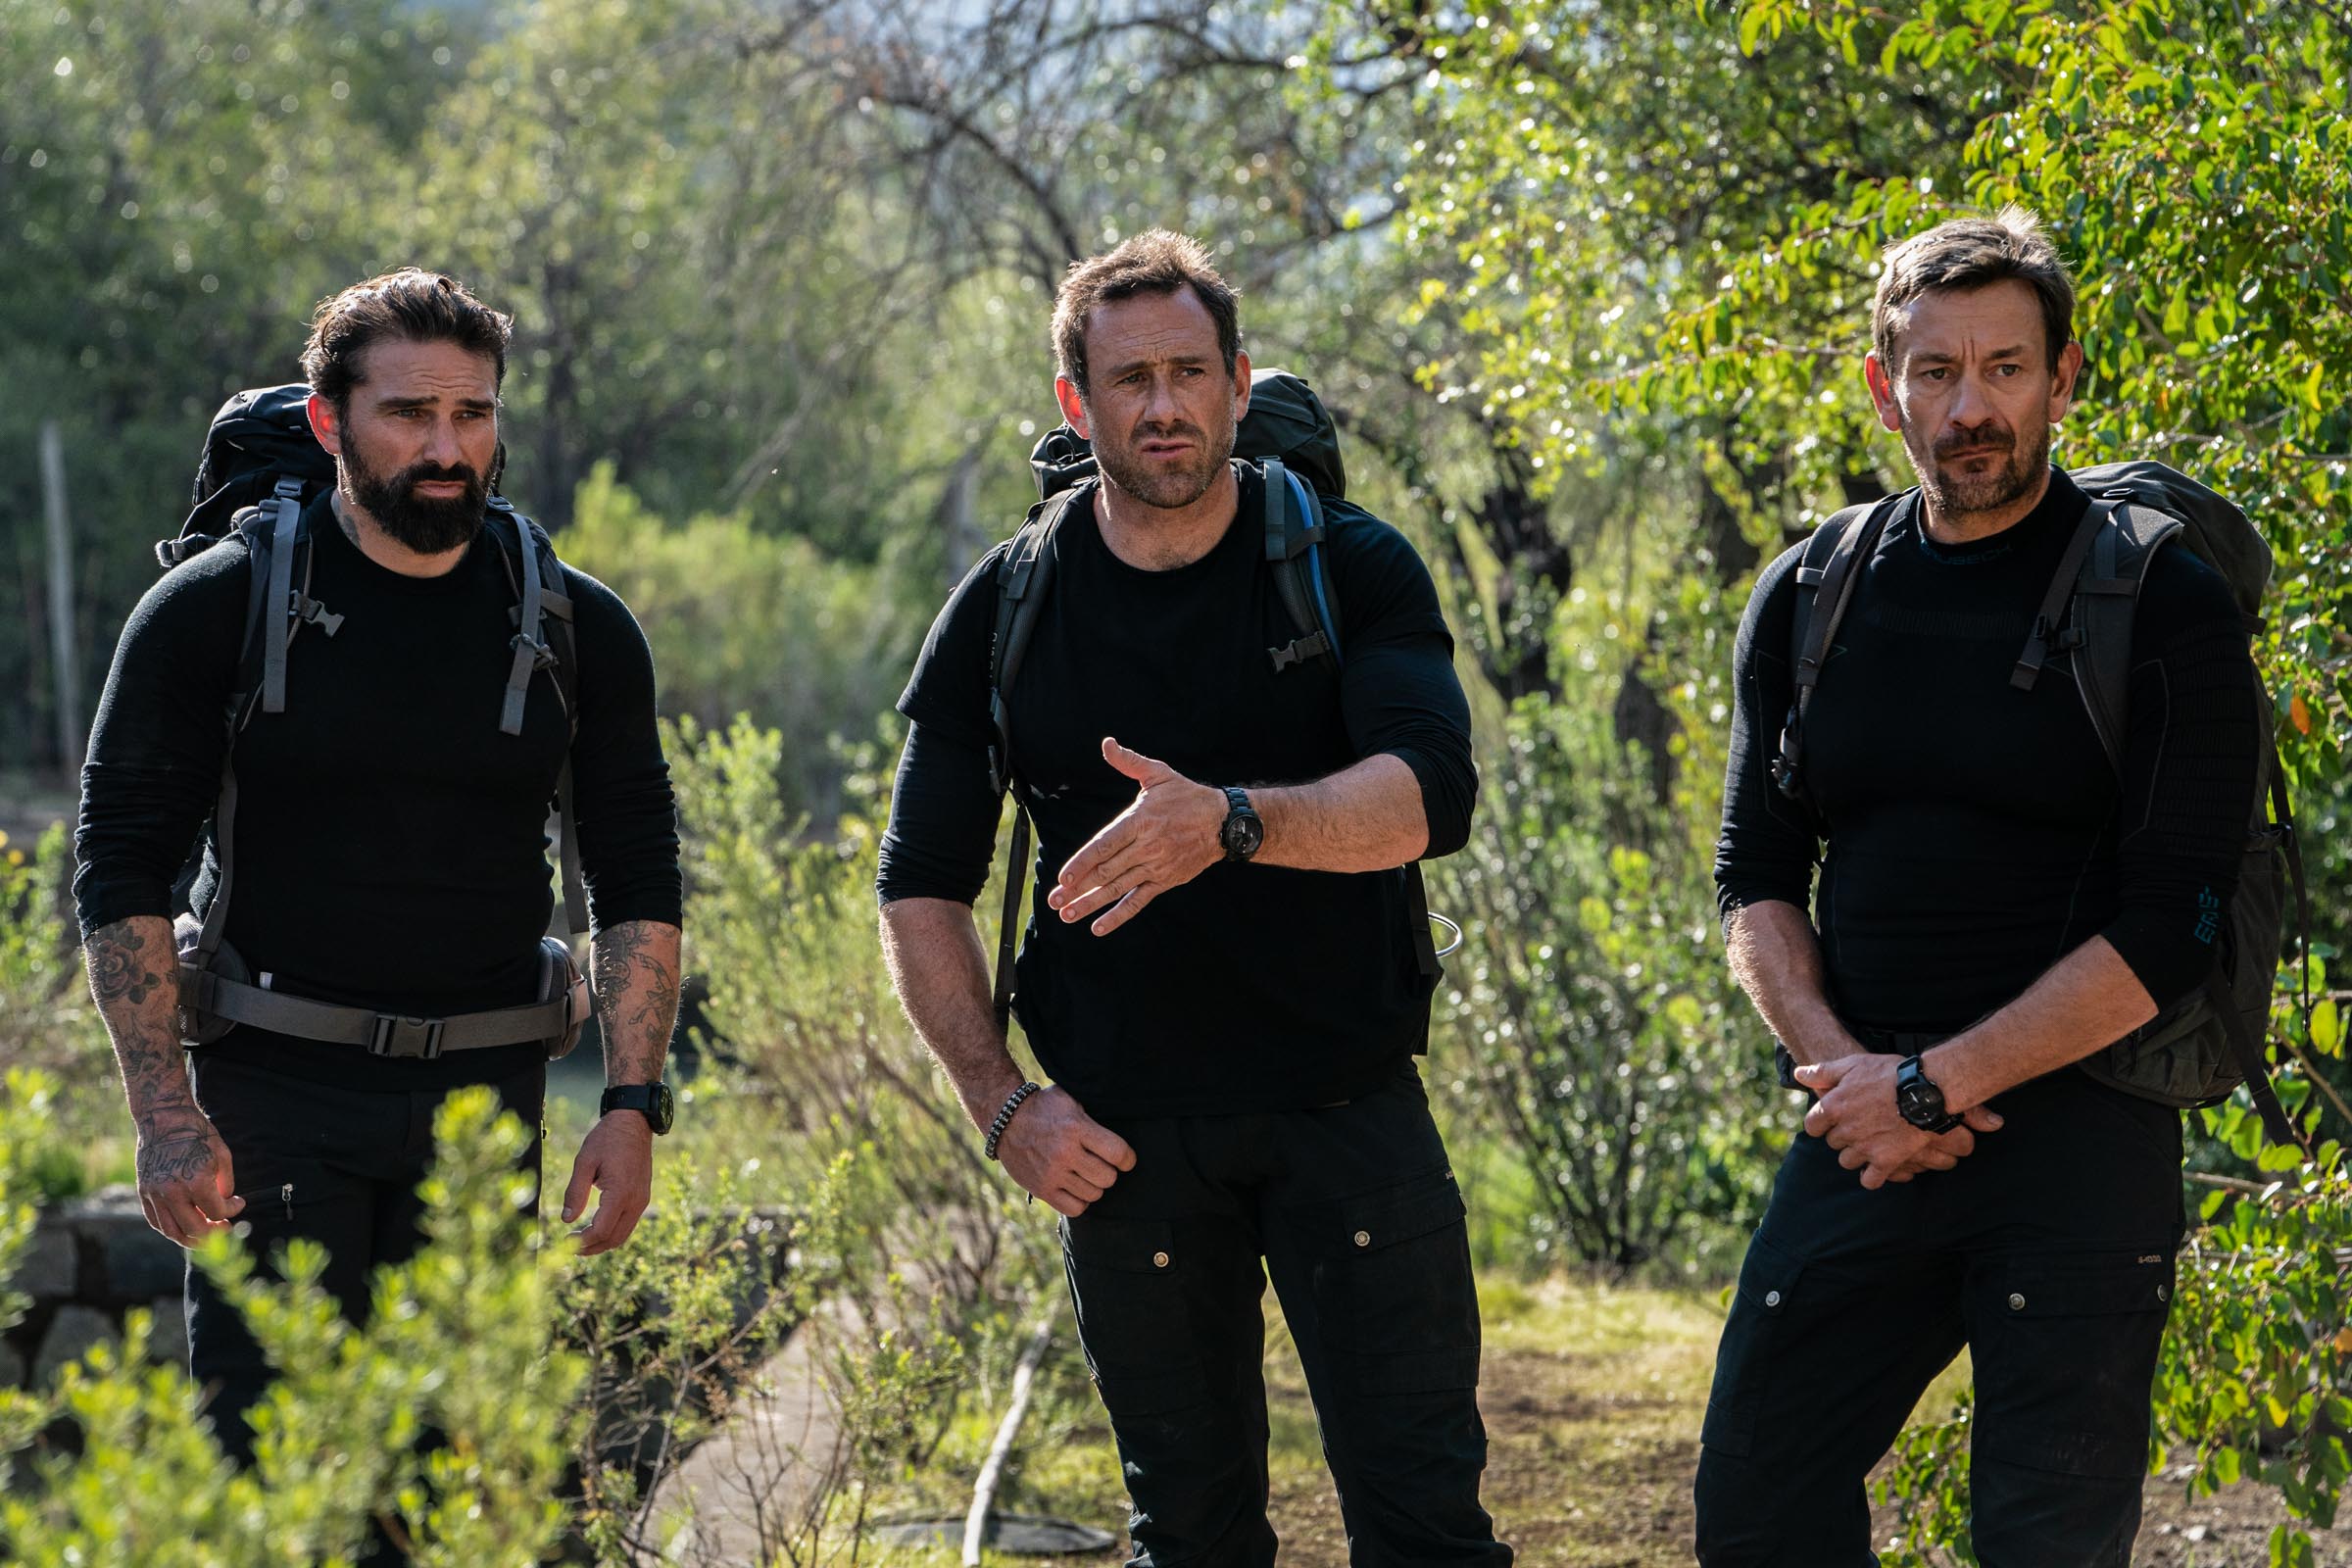  Chief Instructor Ant Middleton and DS Jason Fox &amp; Ollie Ollerton at the Animas Hills Log Pools after the uphill race  Episode 2  Minnow Films / Channel 4 